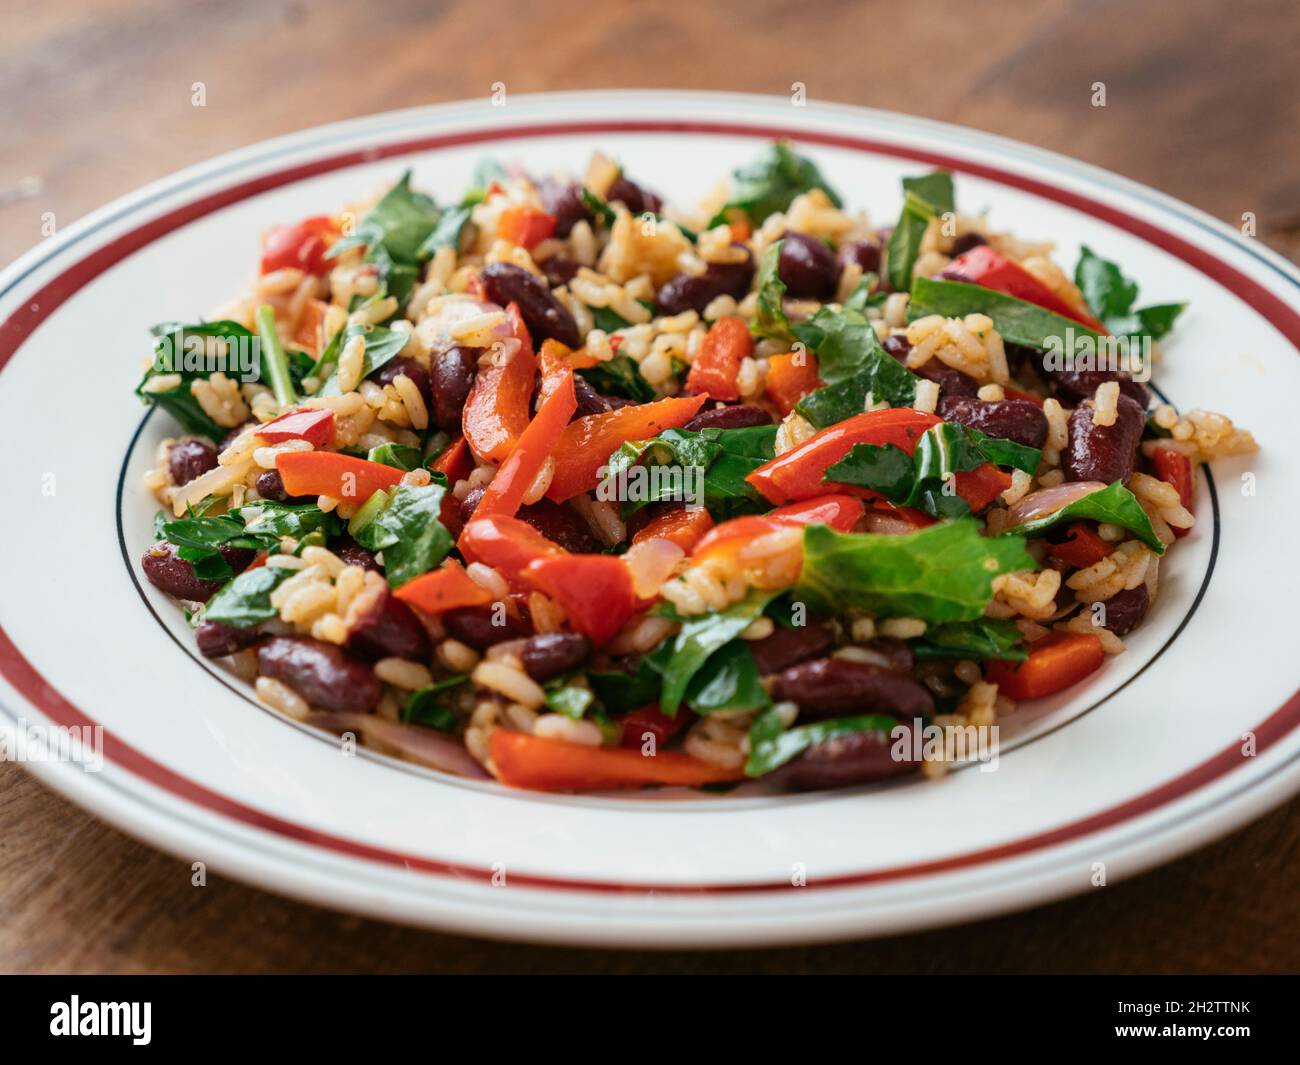 Rice and Beans with Sauteed Greens Stock Photo